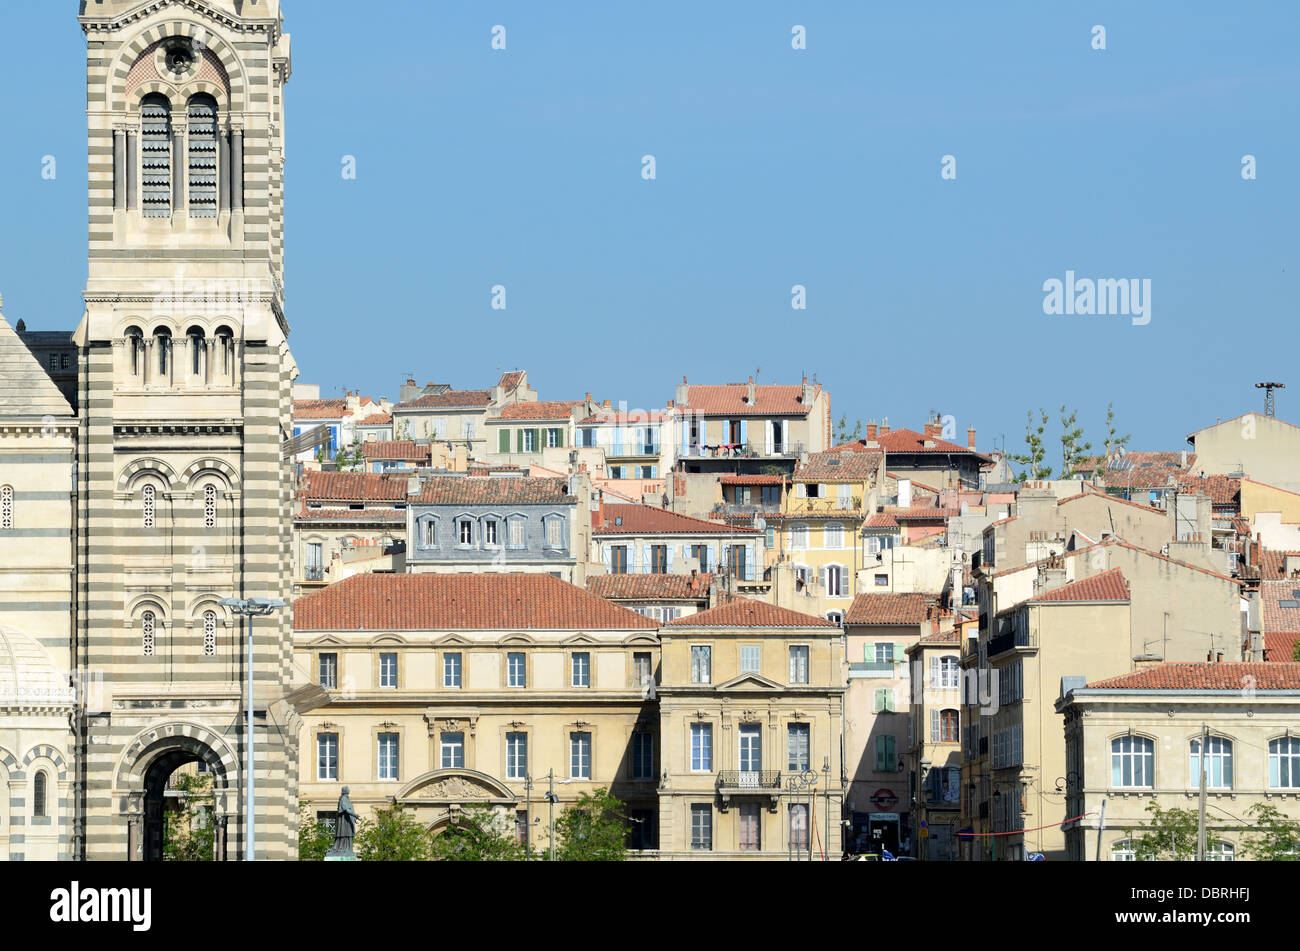 Marseille Cathedral of Saint Mary Major, Cathédrale de la Major, & View over Skyline of Panier District or Old Town Marseille France Stock Photo